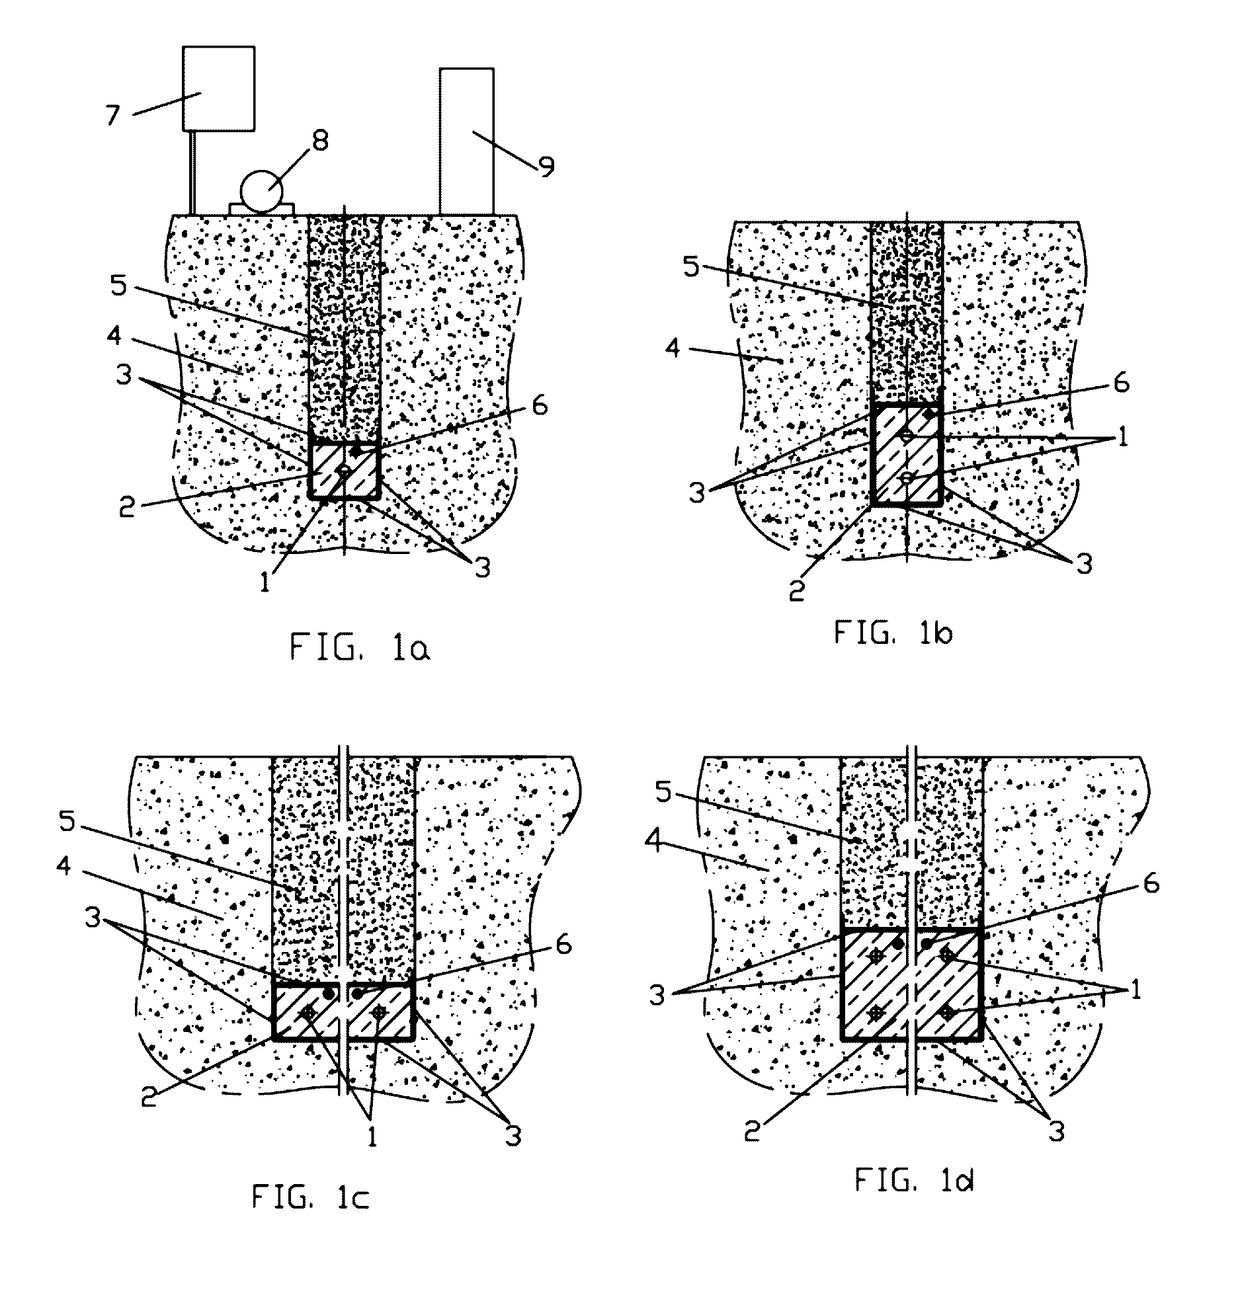 Horizontal ground-coupled heat exchanger for geothermal systems